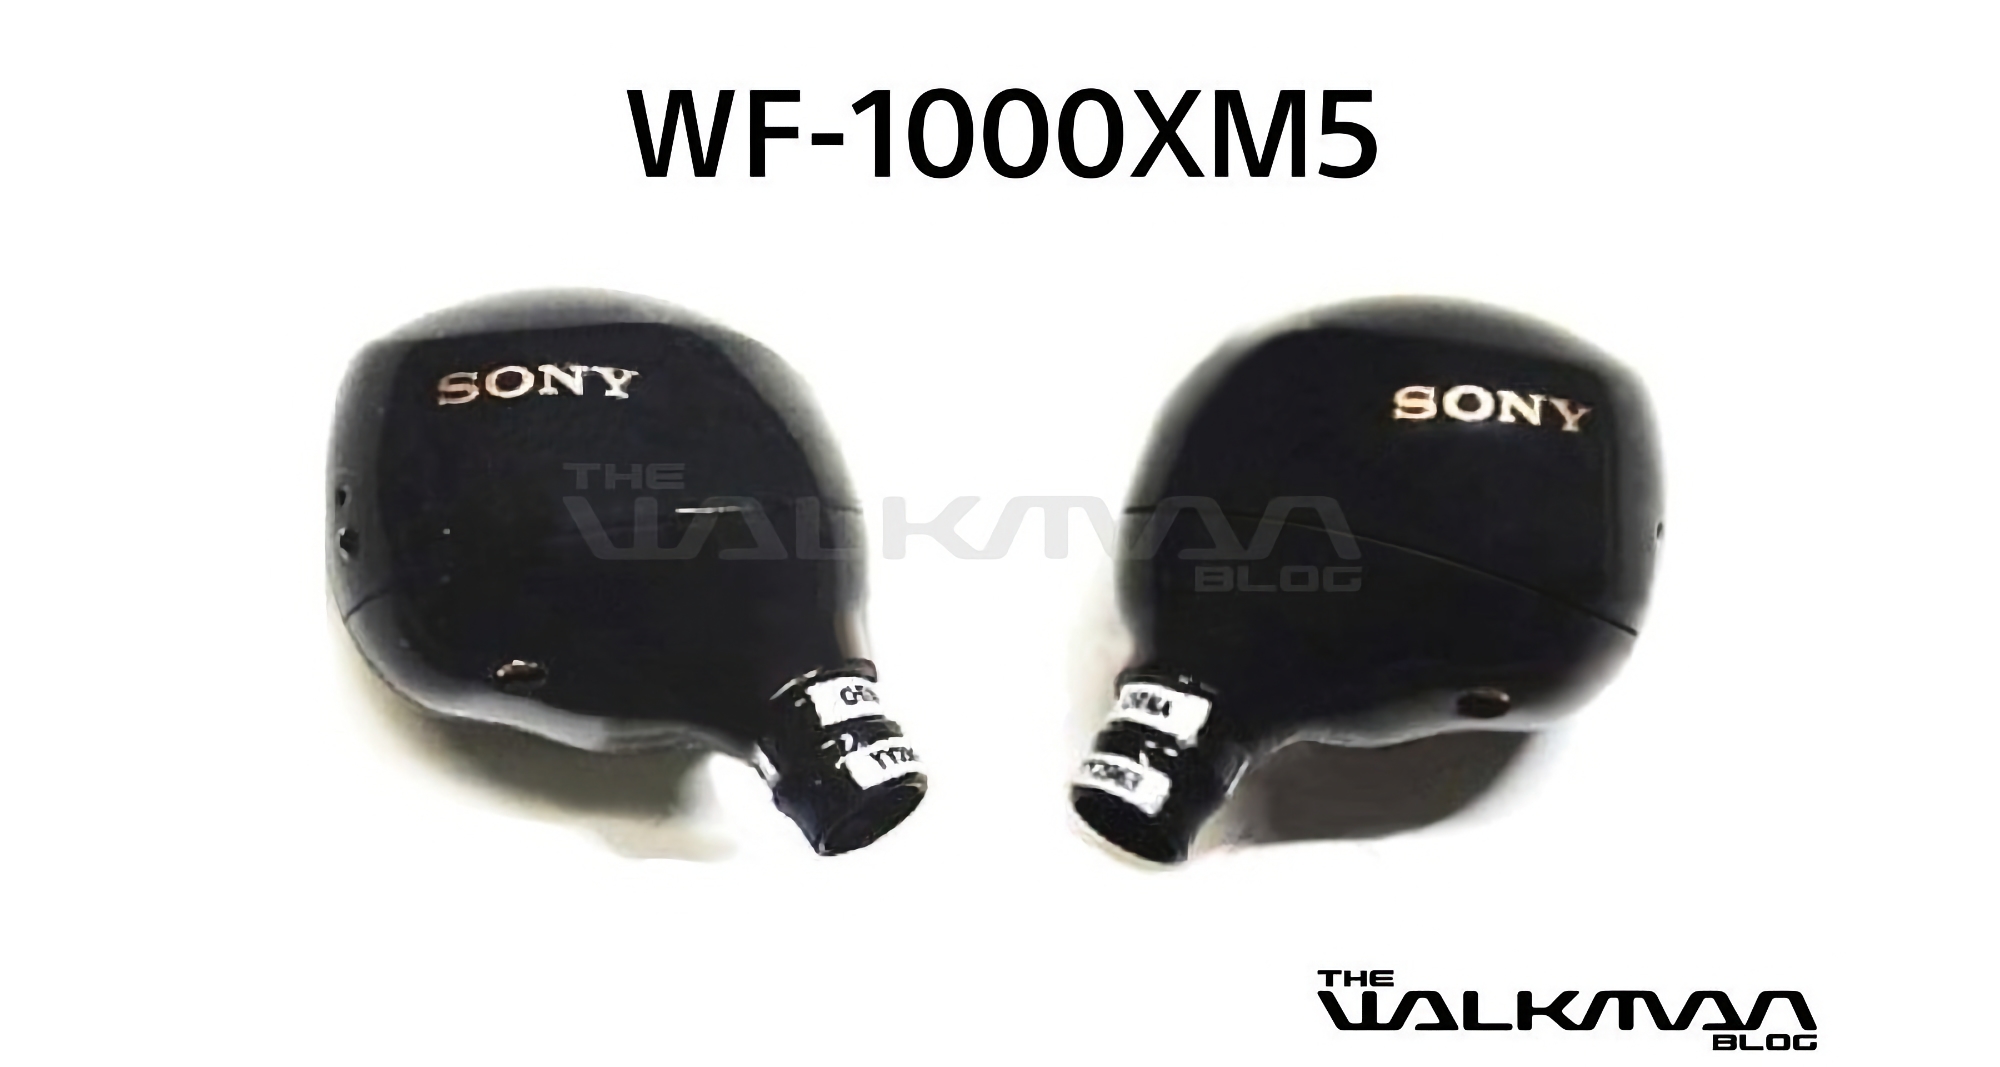 Images of the Sony WF-1000XM5: the company's new flagship TWS headphones have surfaced online